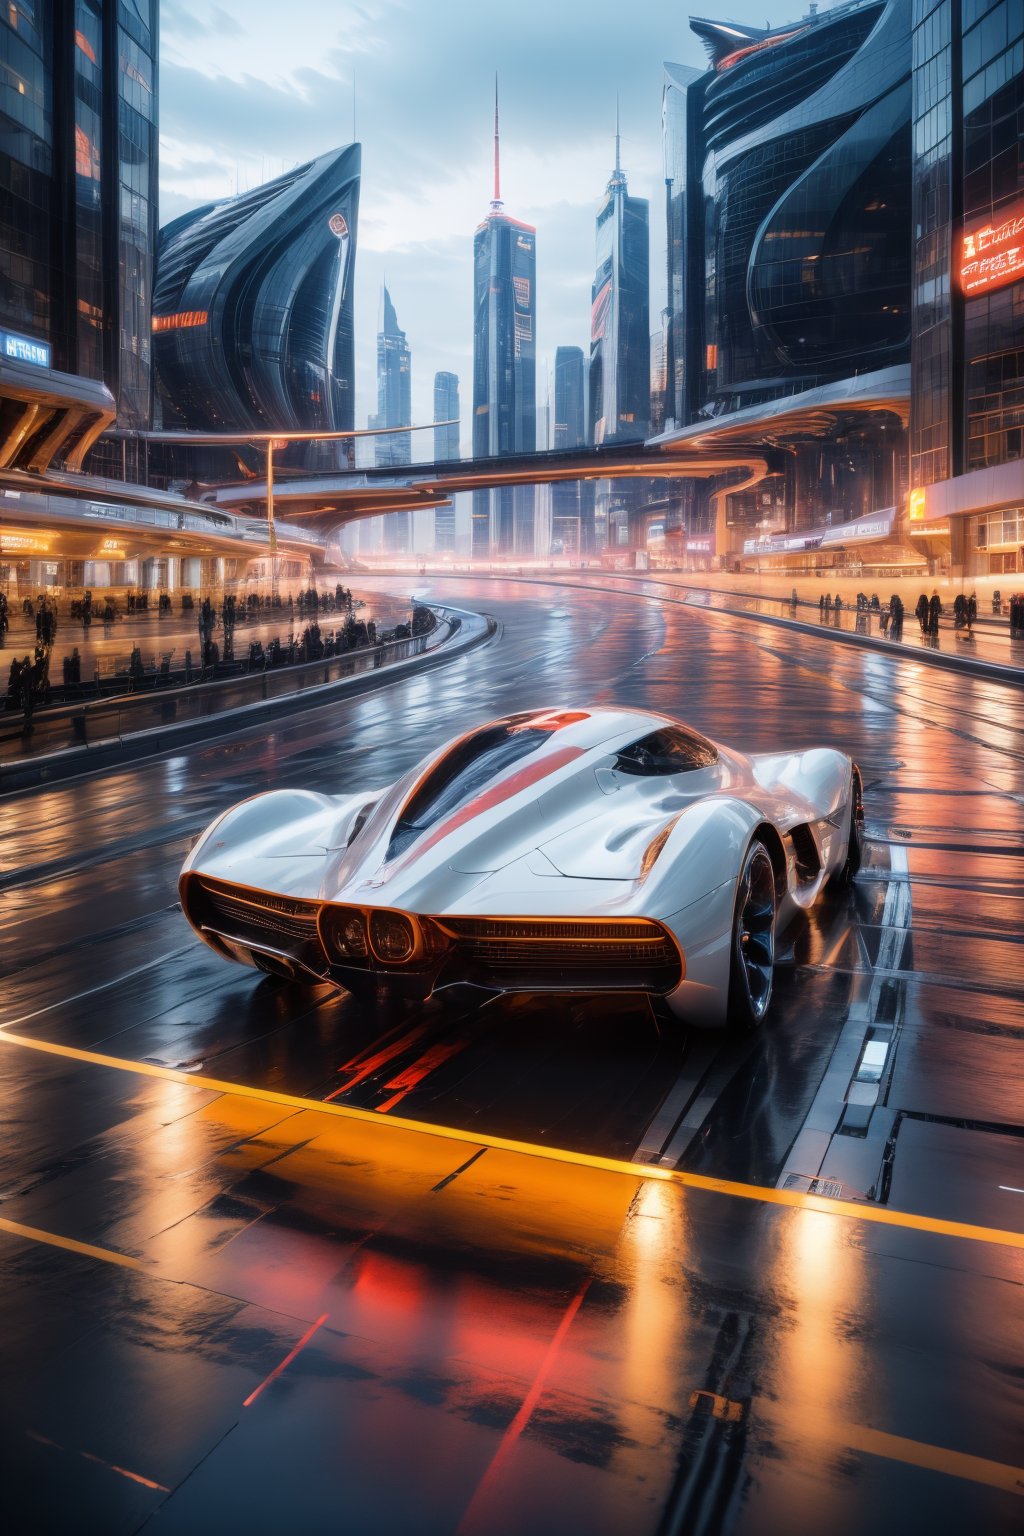 photorealistic, realistic, car, motor vehicle, science fiction, aircraft, city, flying, scenery, helicopter, sky, cloud, realistic, night, skyscraper, cyberpunk